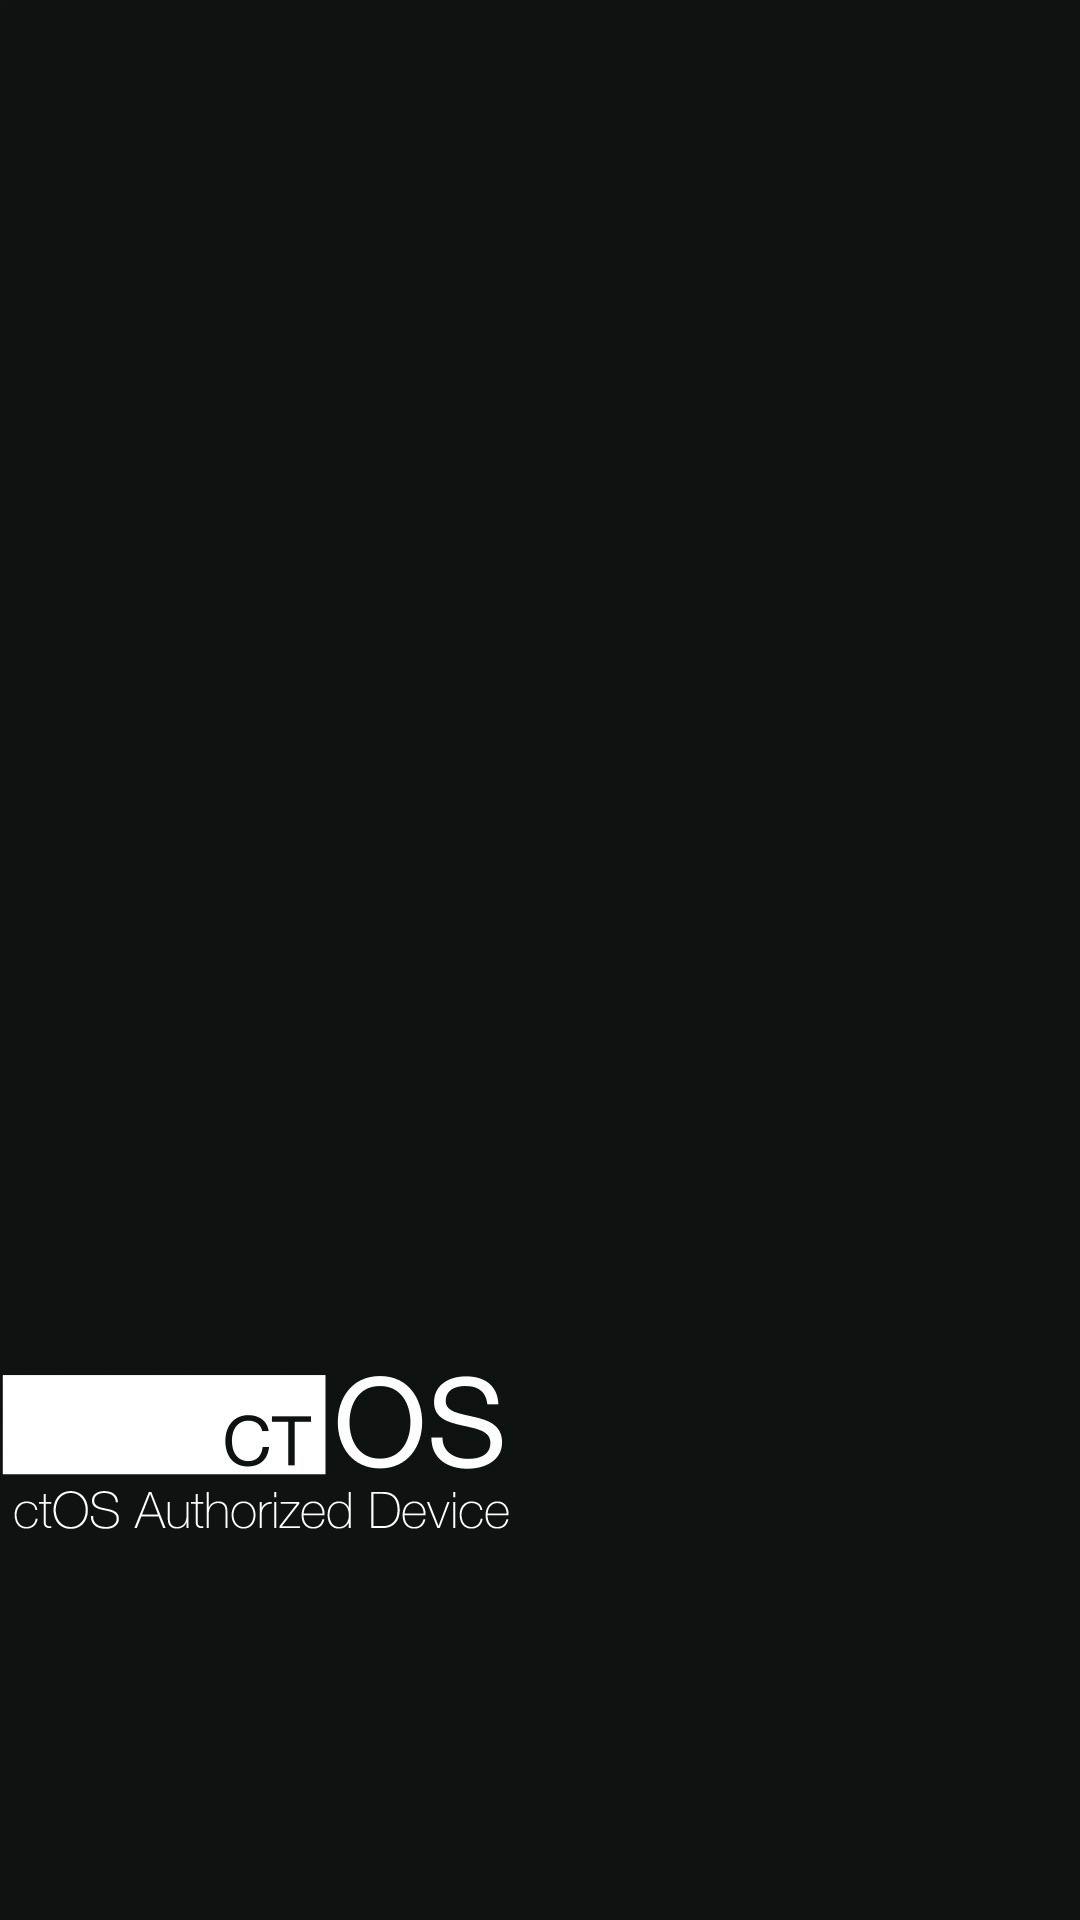 I Made A Ctos Mobile Wallpaper Not Much But M Proud Of It